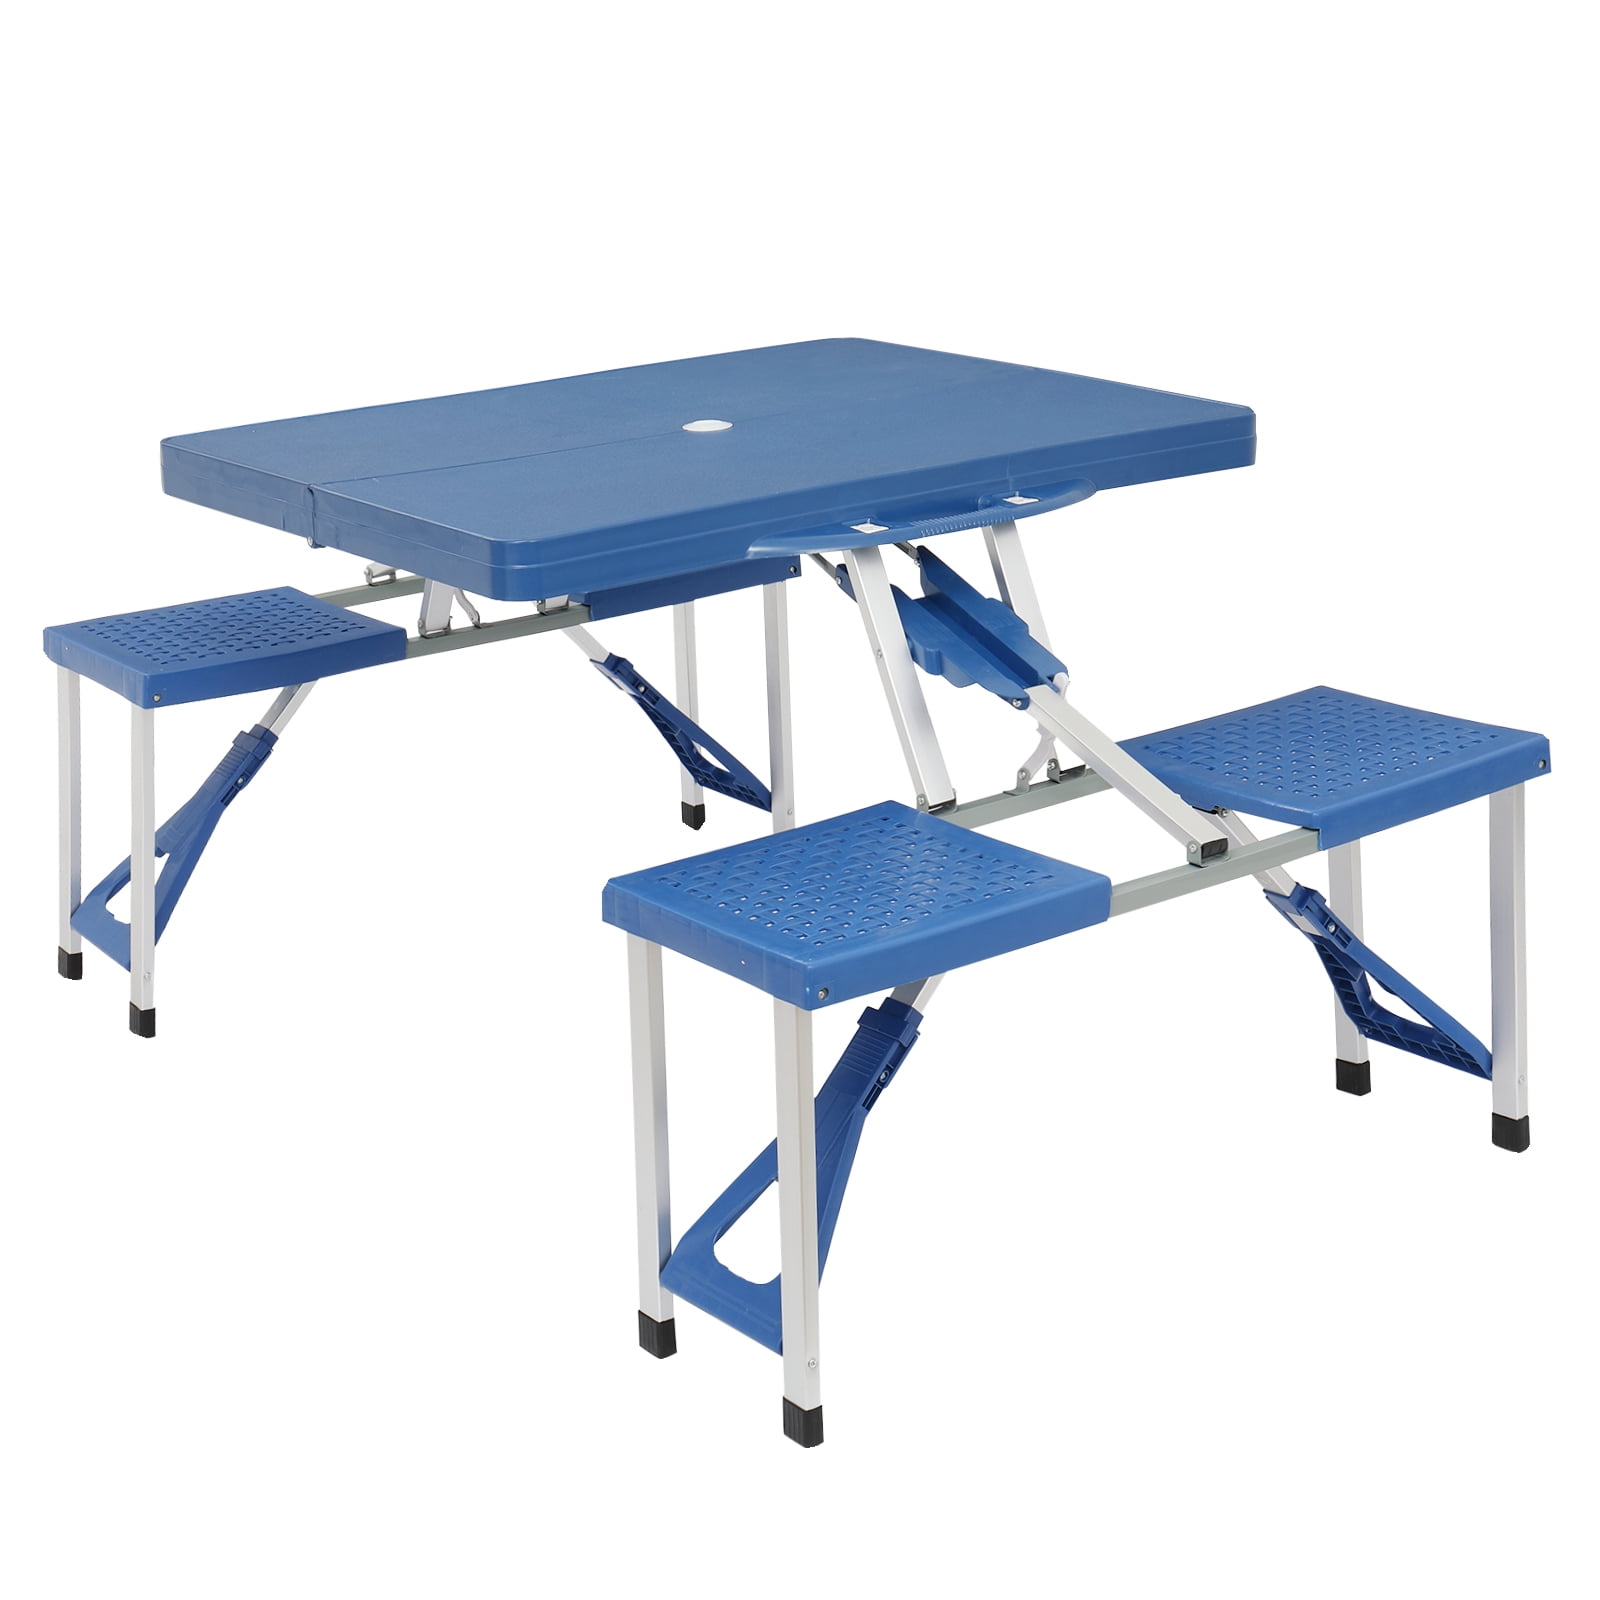 Details about   Aluminum Folding Camping Picnic Table With 4 Chair Seats Portable Table Silver 